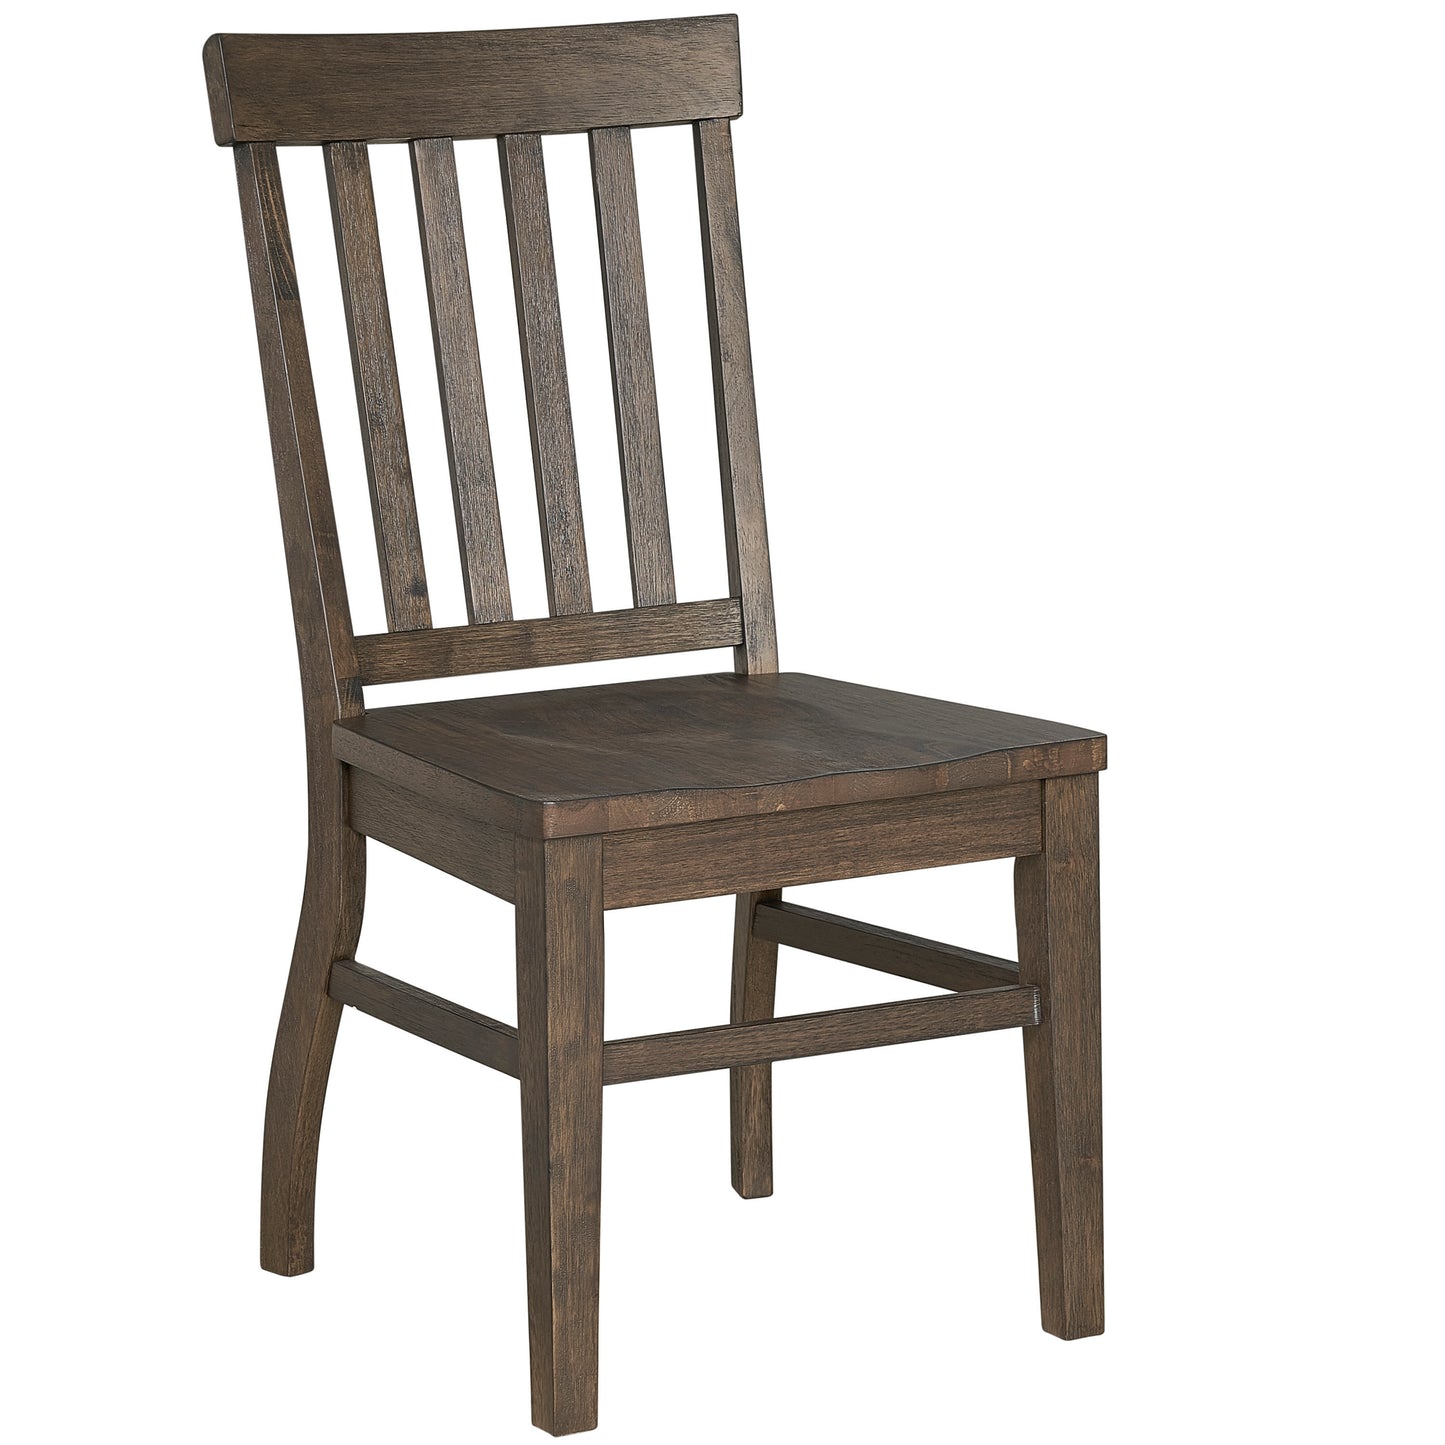 Dark Oak Side Chair: Authentic Farmhouse Style, Distressed Look, Solid Wood Construction, Comfortable Scooped Seat, Set of 2 Chairs